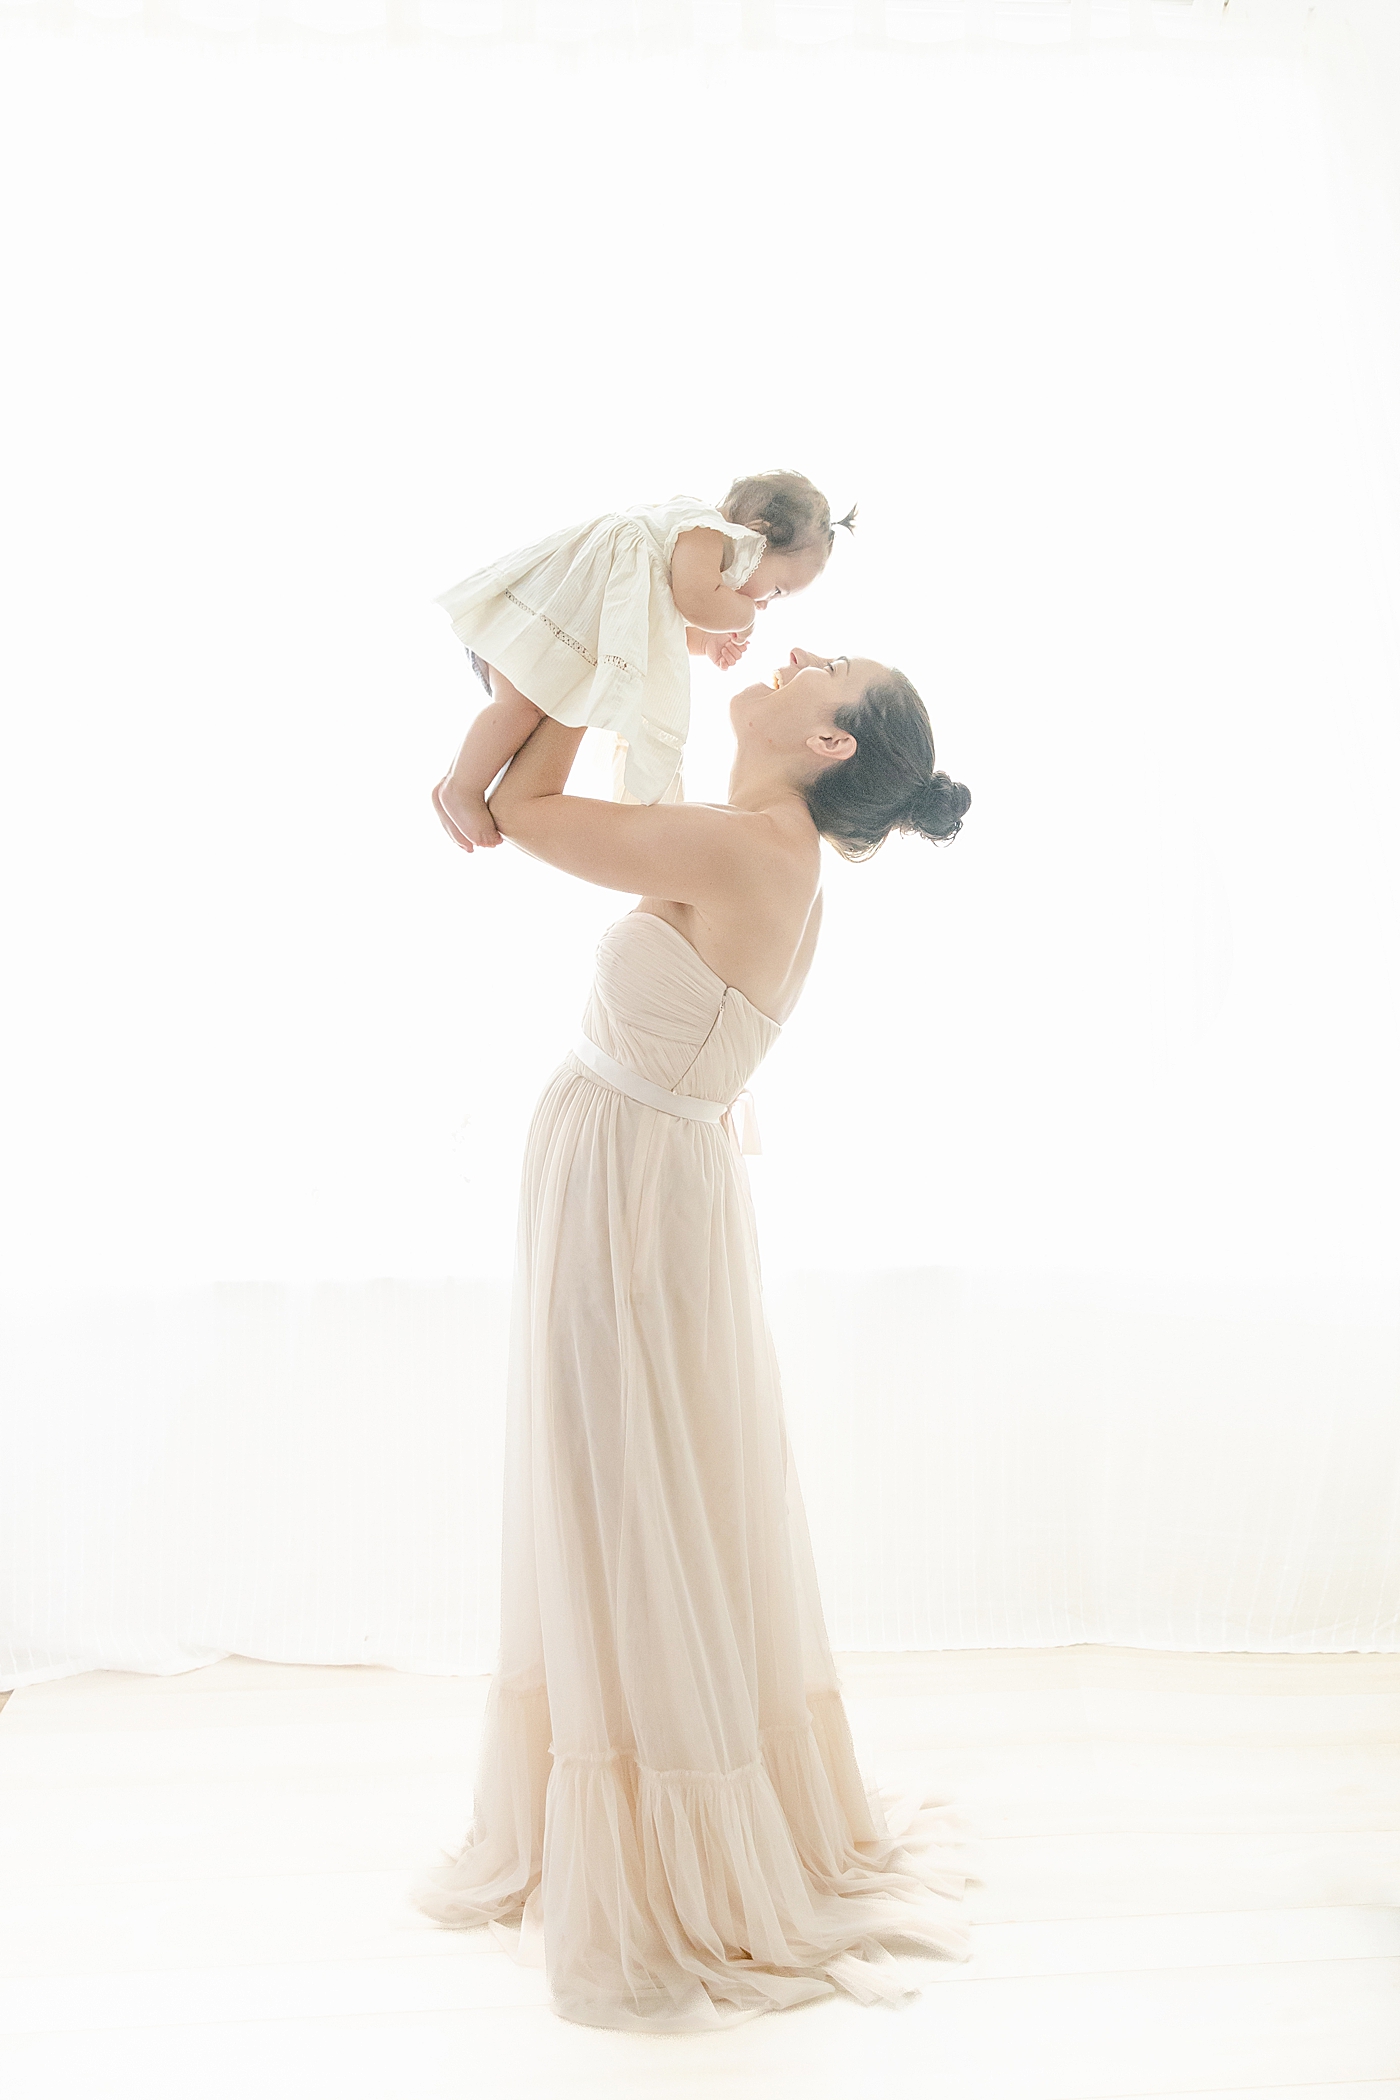 Mom playing airplane with her baby girl | Image by Chrissy Winchester Photography